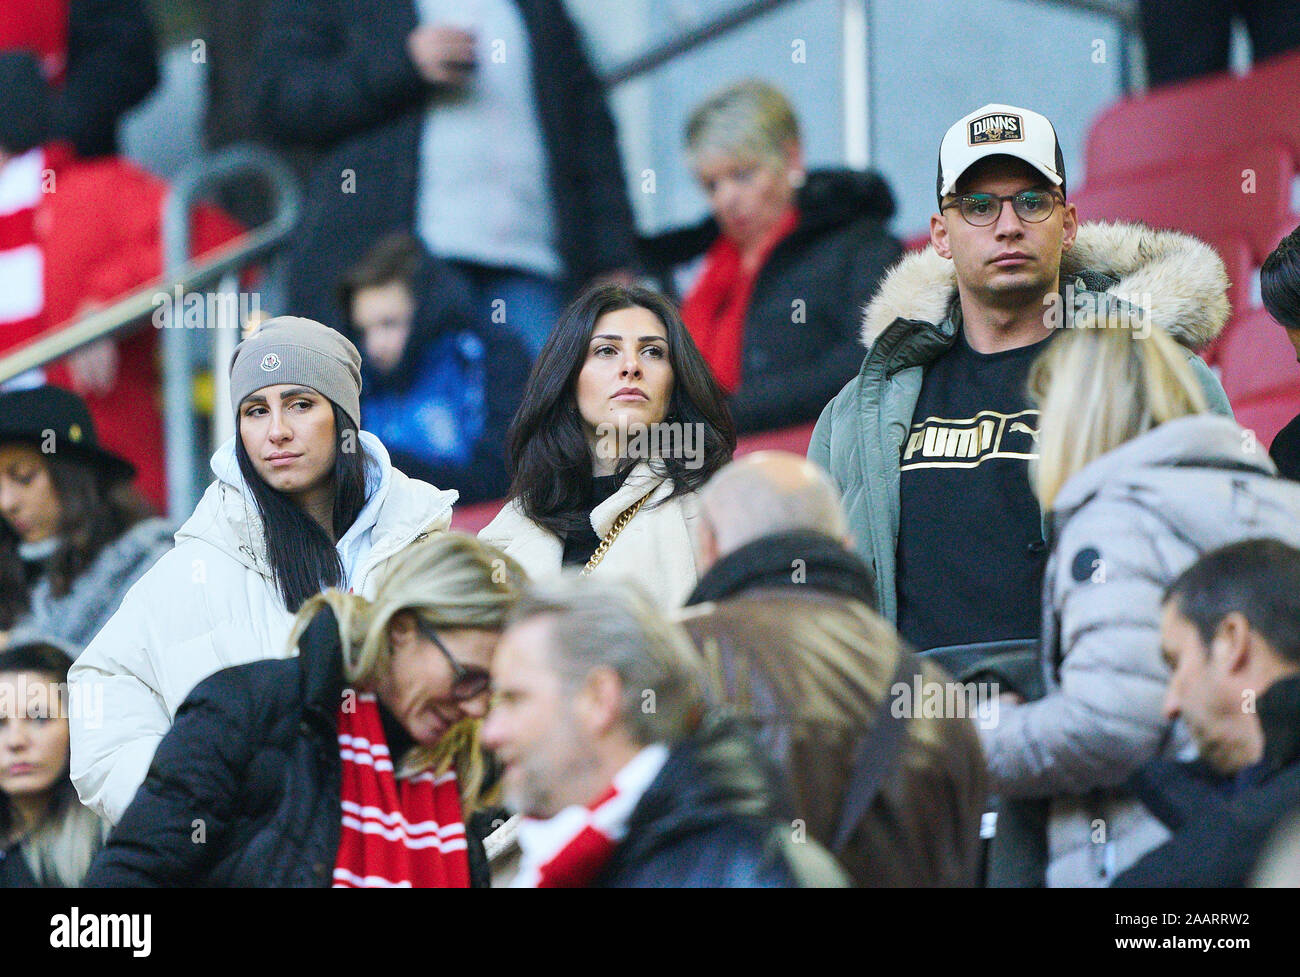 Dusseldorf, Germany. 23rd Nov, 2019. Football Fortuna Düsseldorf-FC Bayern Munich 0-4 , Duesseldorf Nov 23, 2019. german singer Pietro LOMBARDI, winner 2011 DSDS, Deutschland sucht den Superstar FORTUNA DÜSSELDORF - FC BAYERN MUNICH 0-4  - DFL REGULATIONS PROHIBIT ANY USE OF PHOTOGRAPHS as IMAGE SEQUENCES and/or QUASI-VIDEO -  1. Credit: Peter Schatz/Alamy Live News Stock Photo